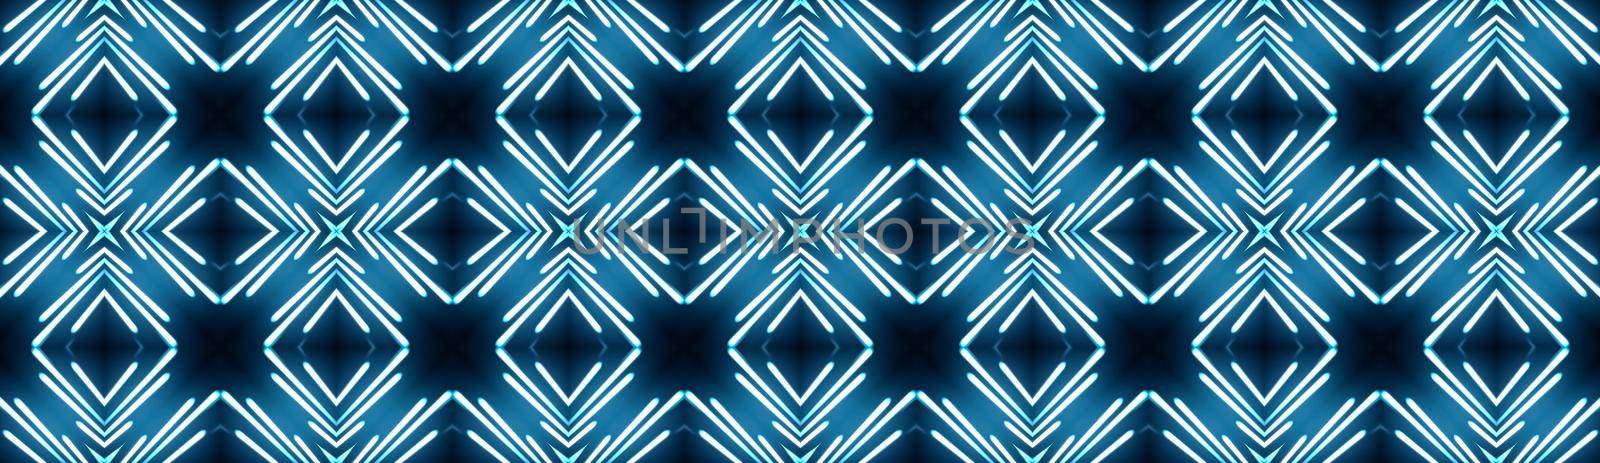 Background with fractal design kaleidoscope sequence patterns,Disco spectrum lights concert spot bulb,Abstract graphics background